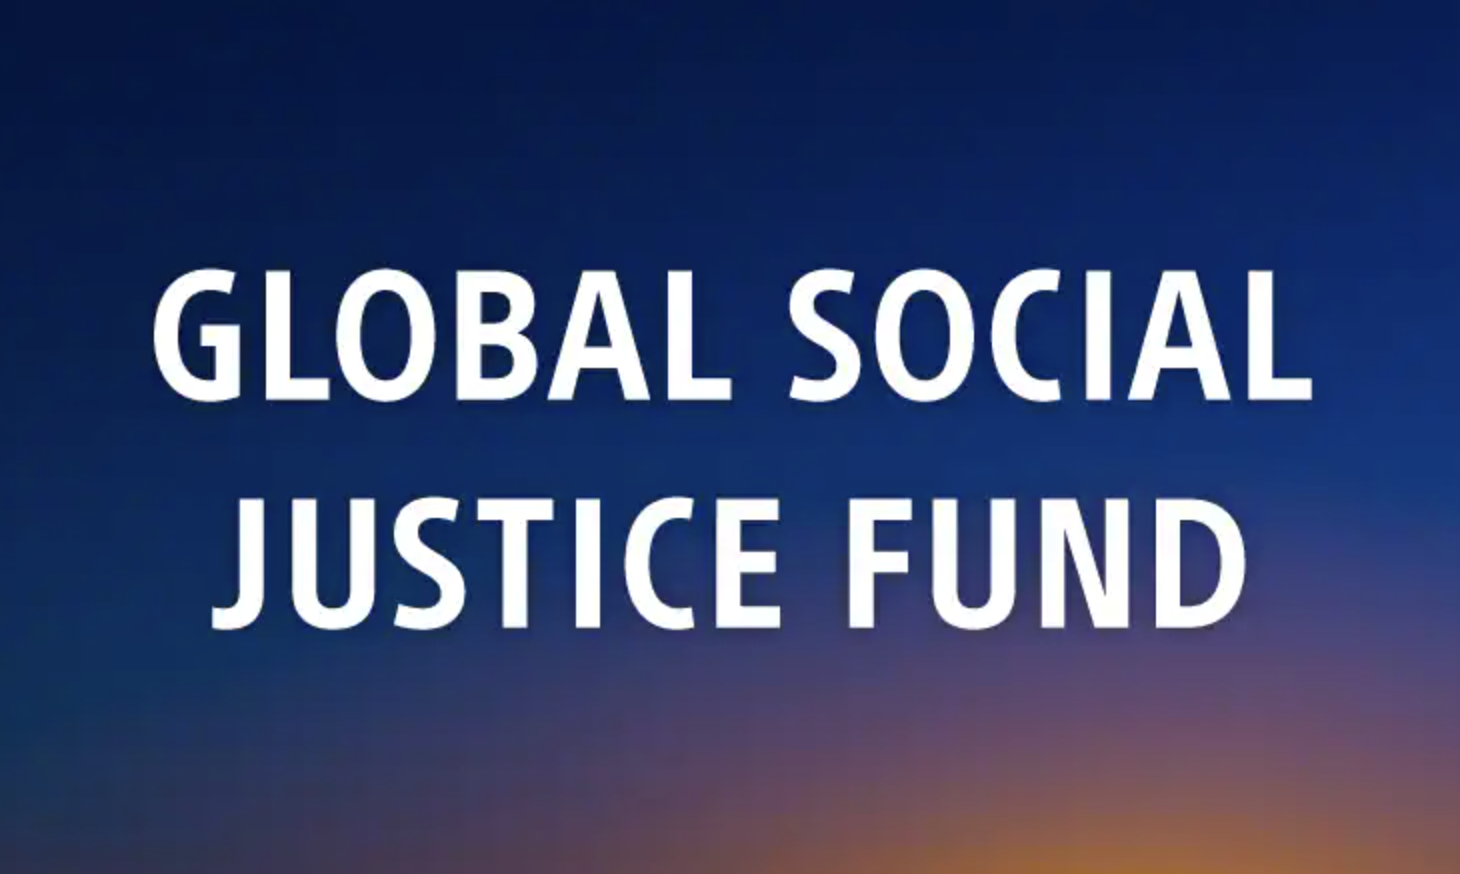 Seven local organisations given funding via Sony Music Group’s Justice Fund